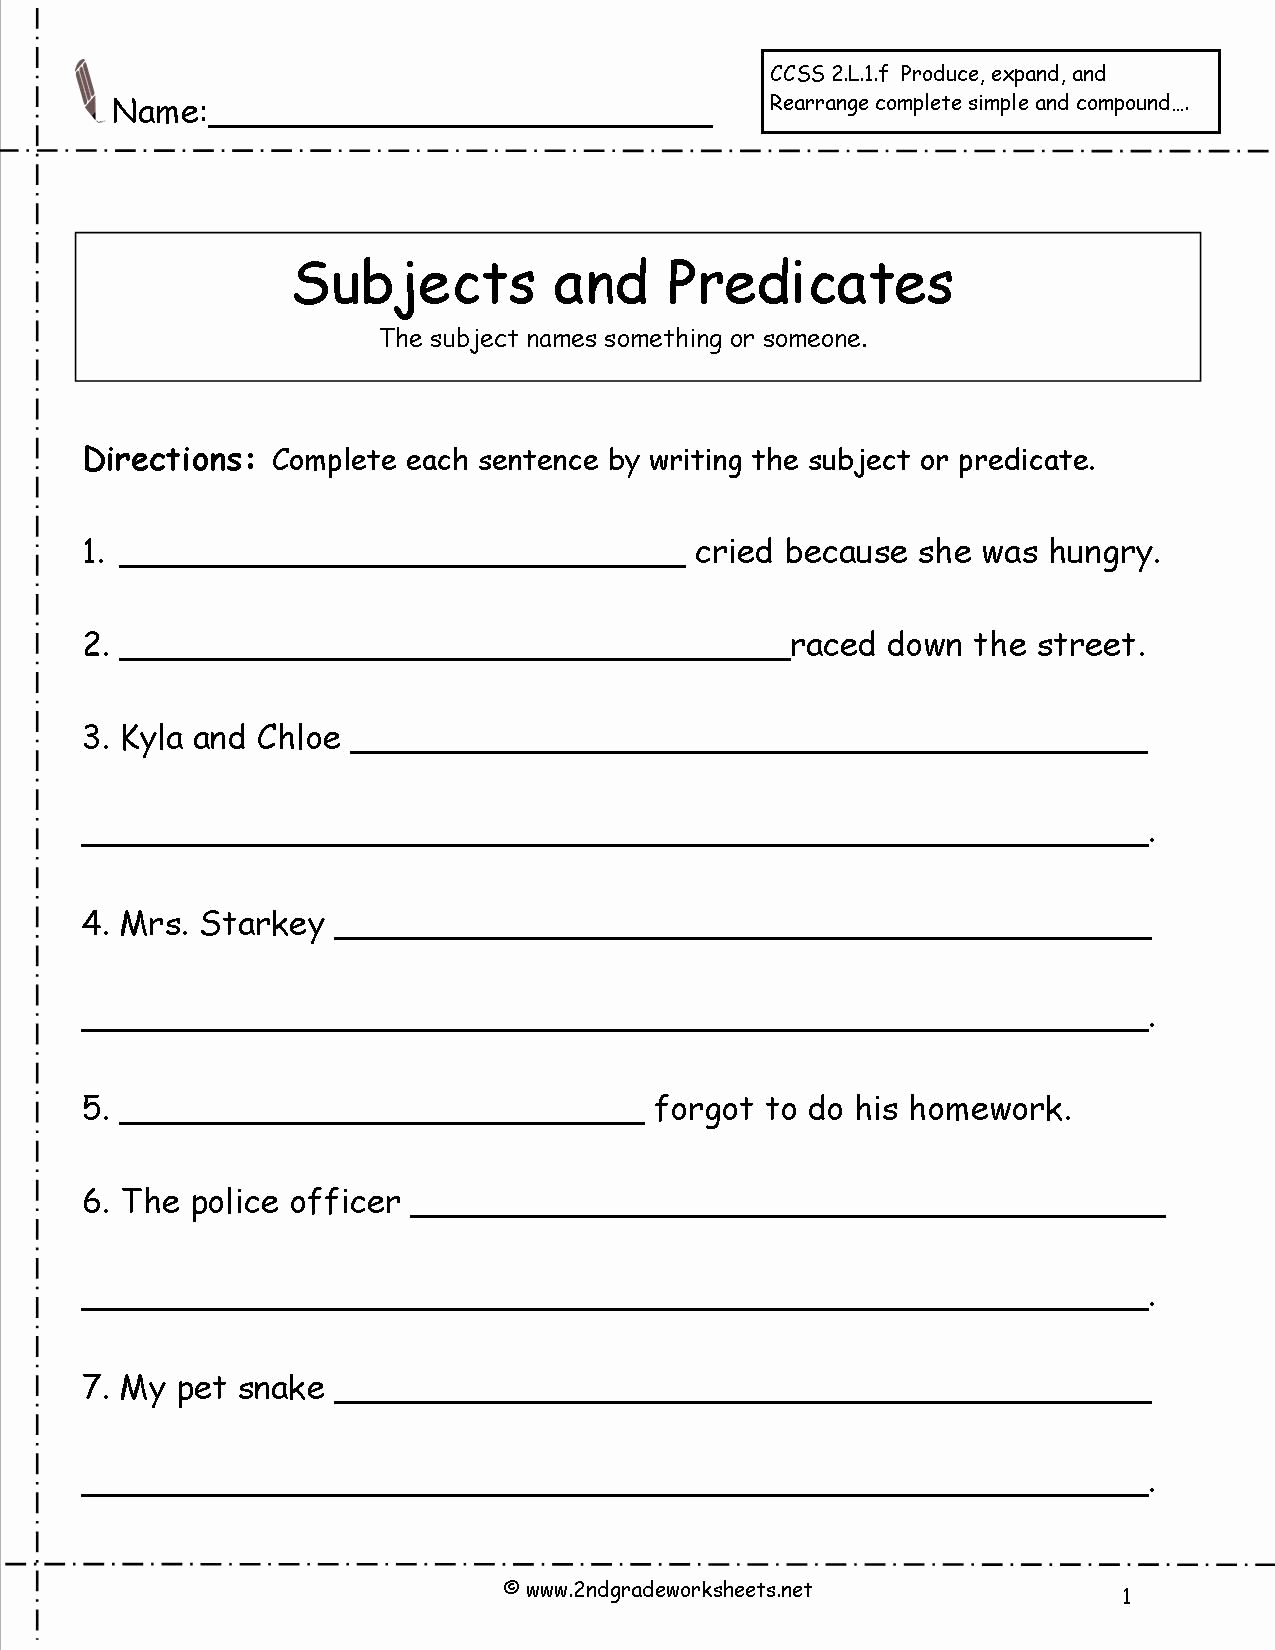 Free Subject and Predicate Worksheets Luxury 32 Subject and Predicate Worksheet Pdf Worksheet